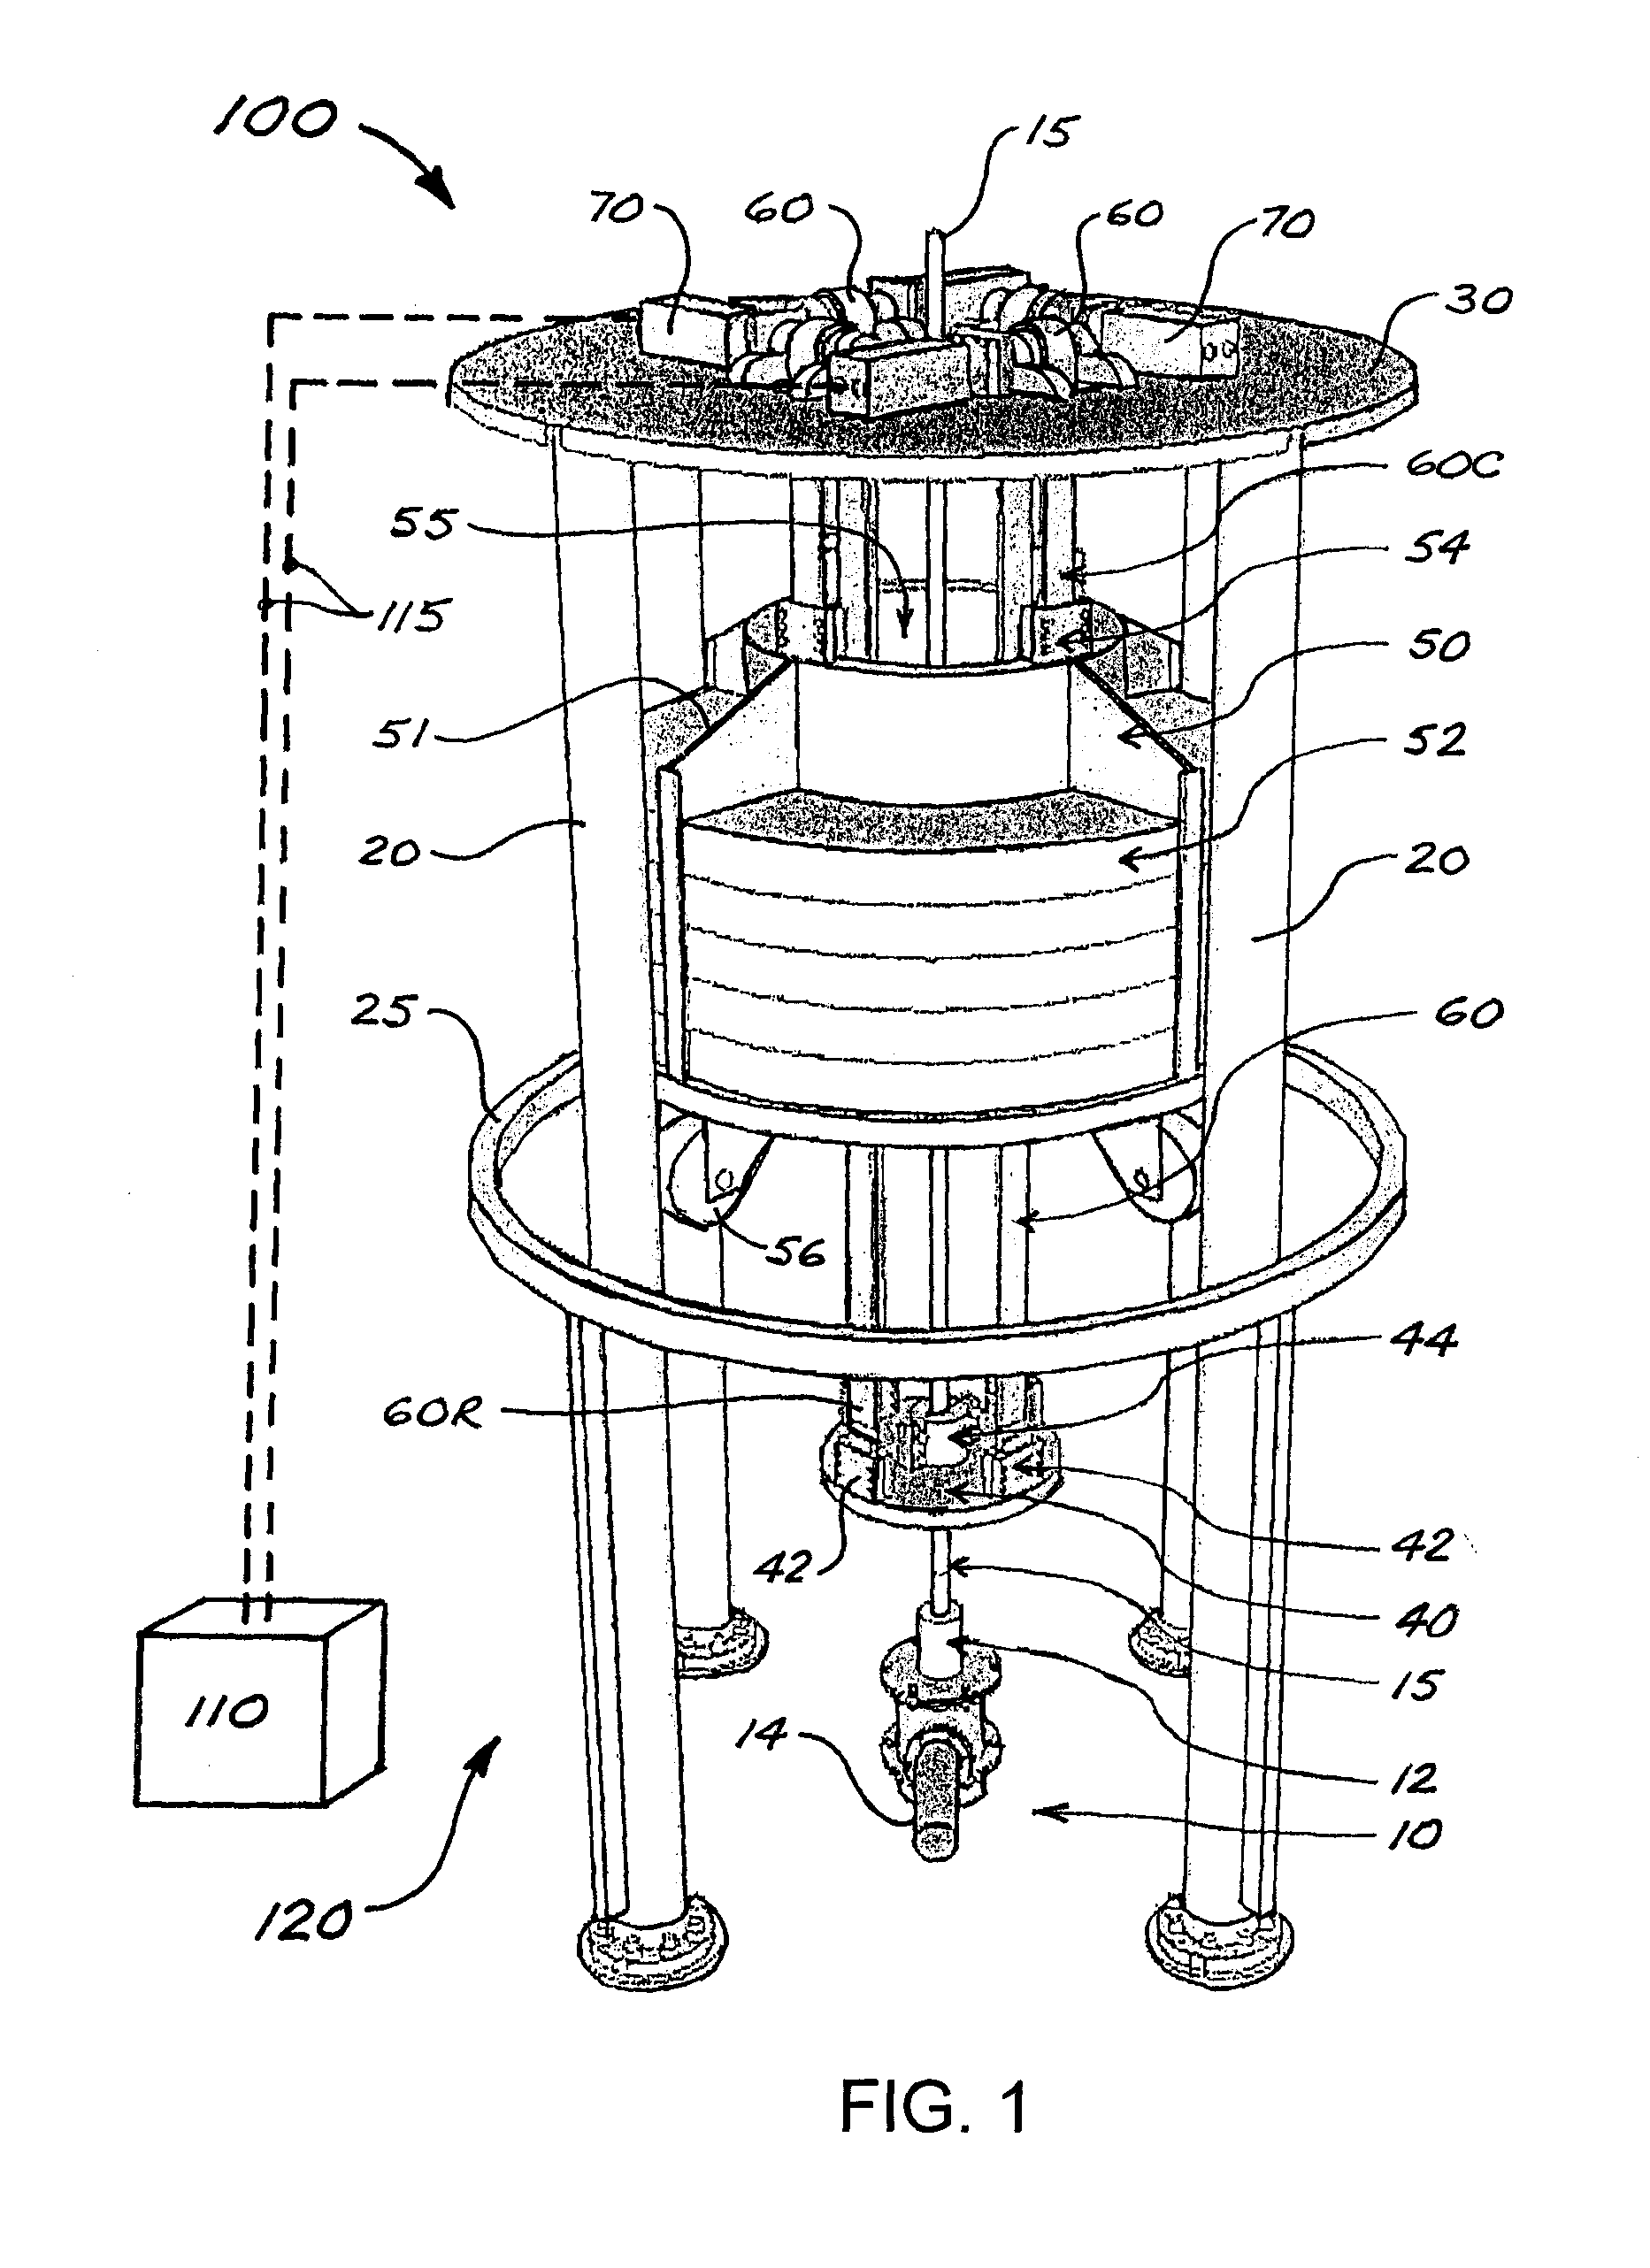 Counterweighted pump jack with reversible motors